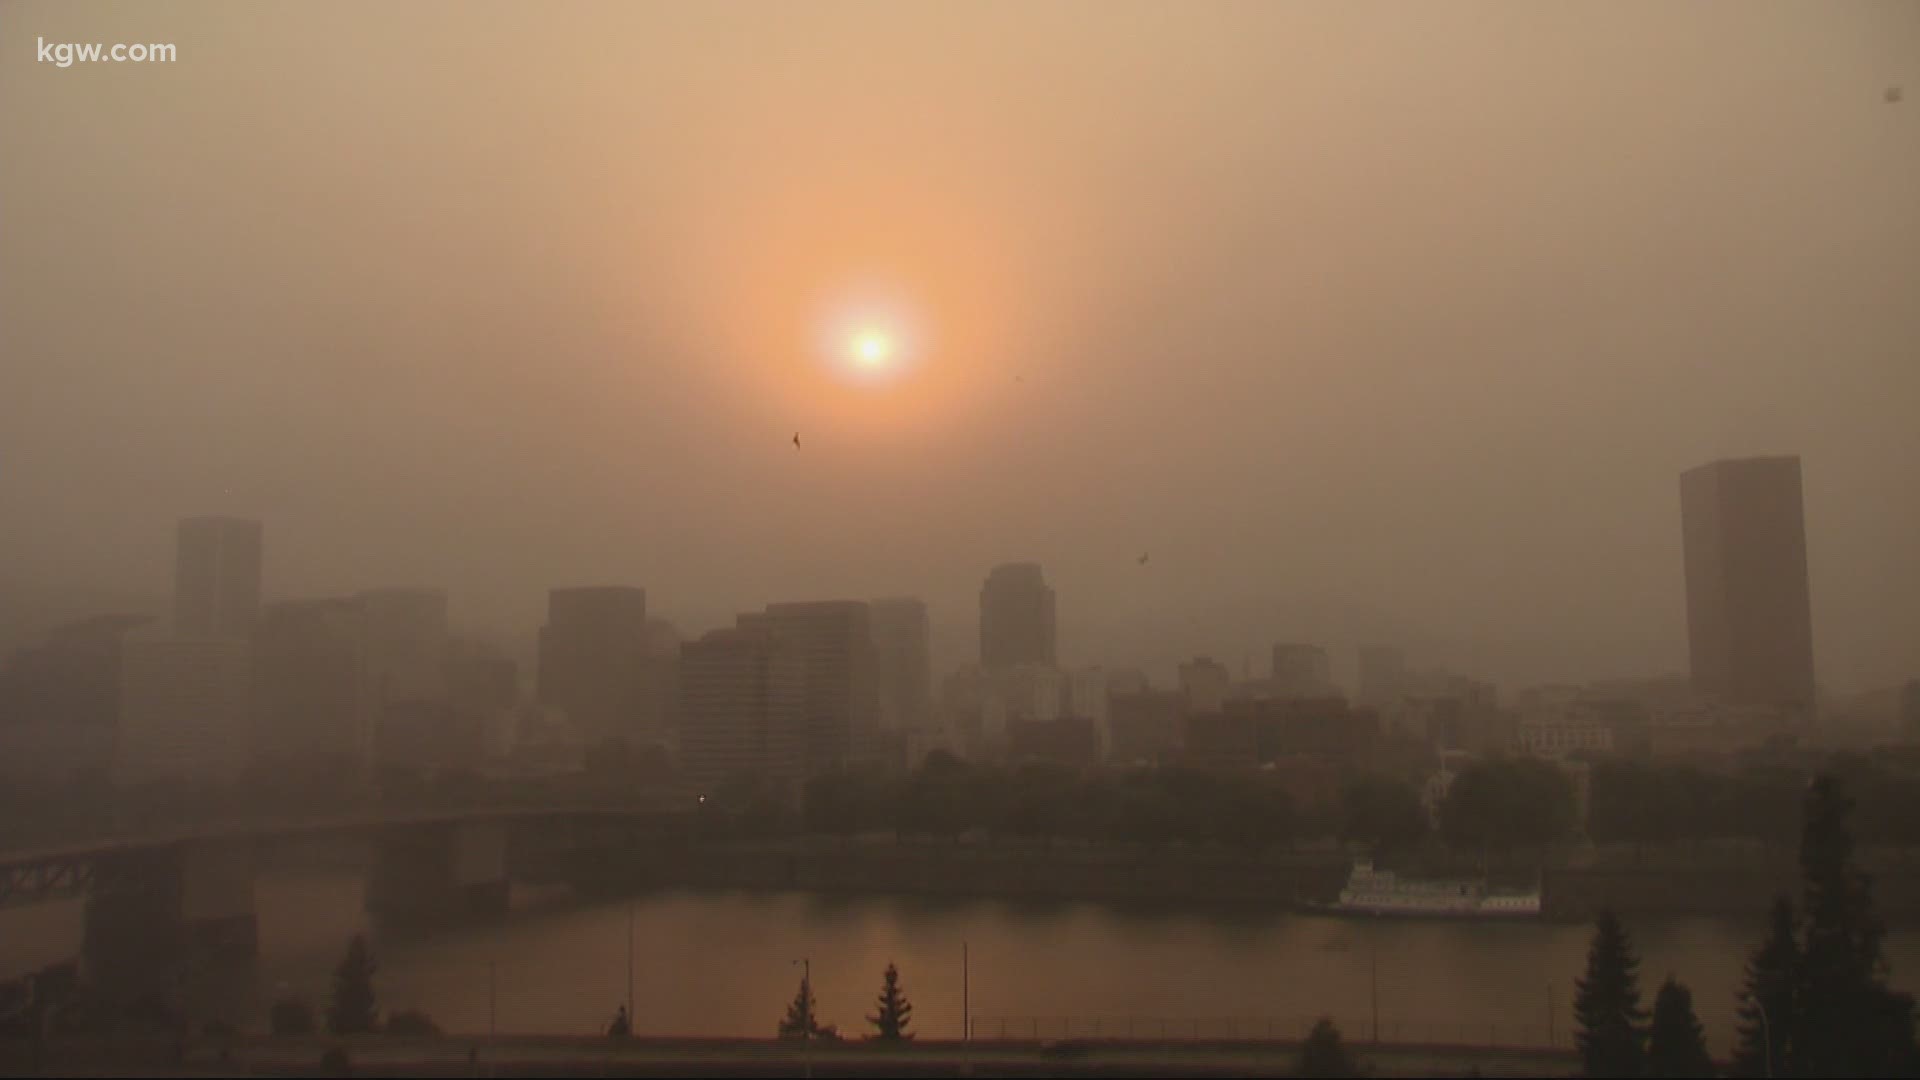 Experts say the air quality will remain hazardous in the Willamette Valley through Thursday.